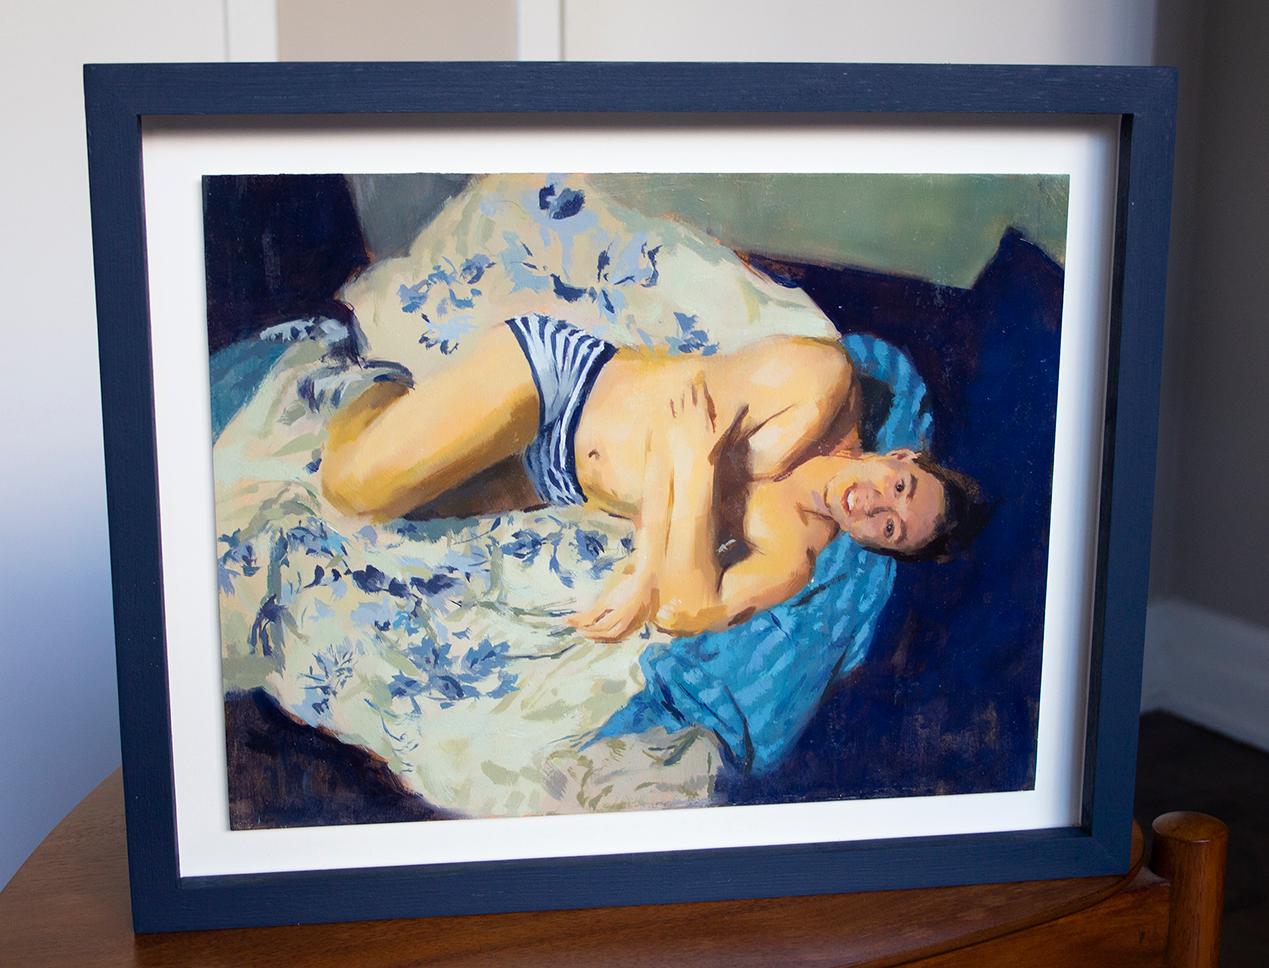 This image is part of the artist's early series of portraits depicting queer subject matter in domestic or outdoor settings, offering something of a private, snapshot-type aesthetic. Depicted in oil paint on paper.